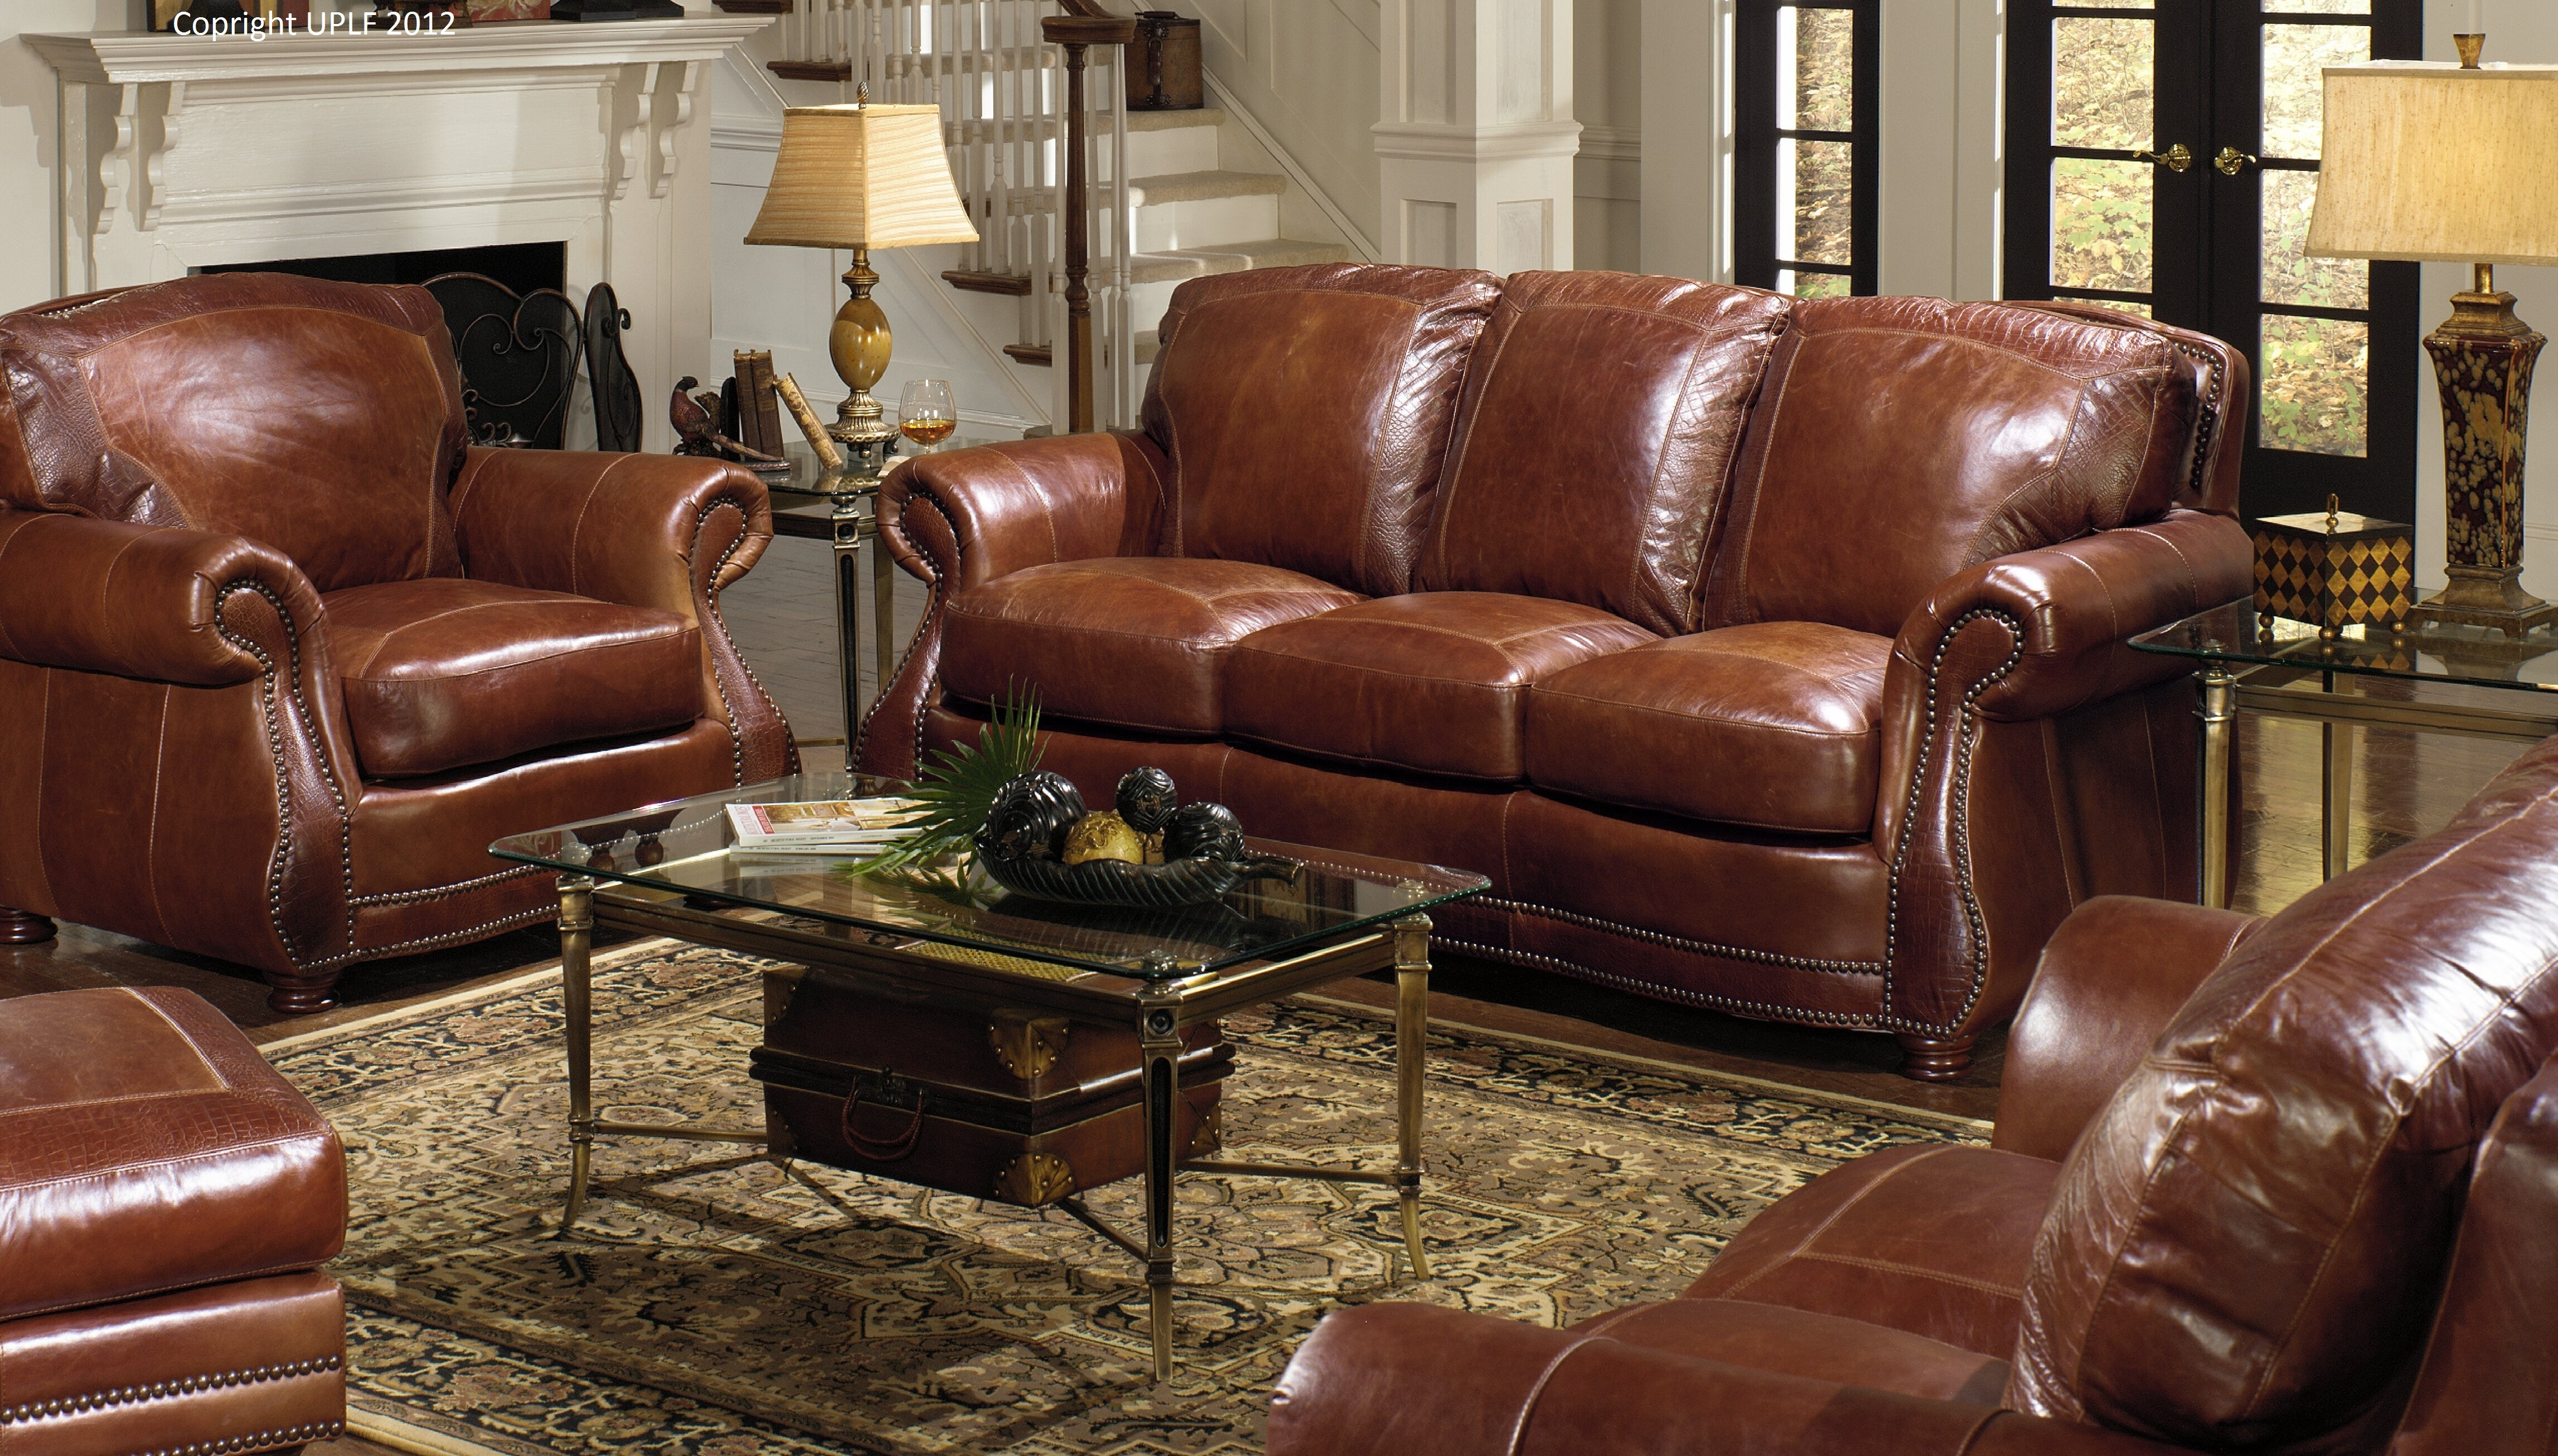 Usa Premium Leather Furniture | Just Another Wordpress Weblog with Usa Premium Leather Furniture Reviews